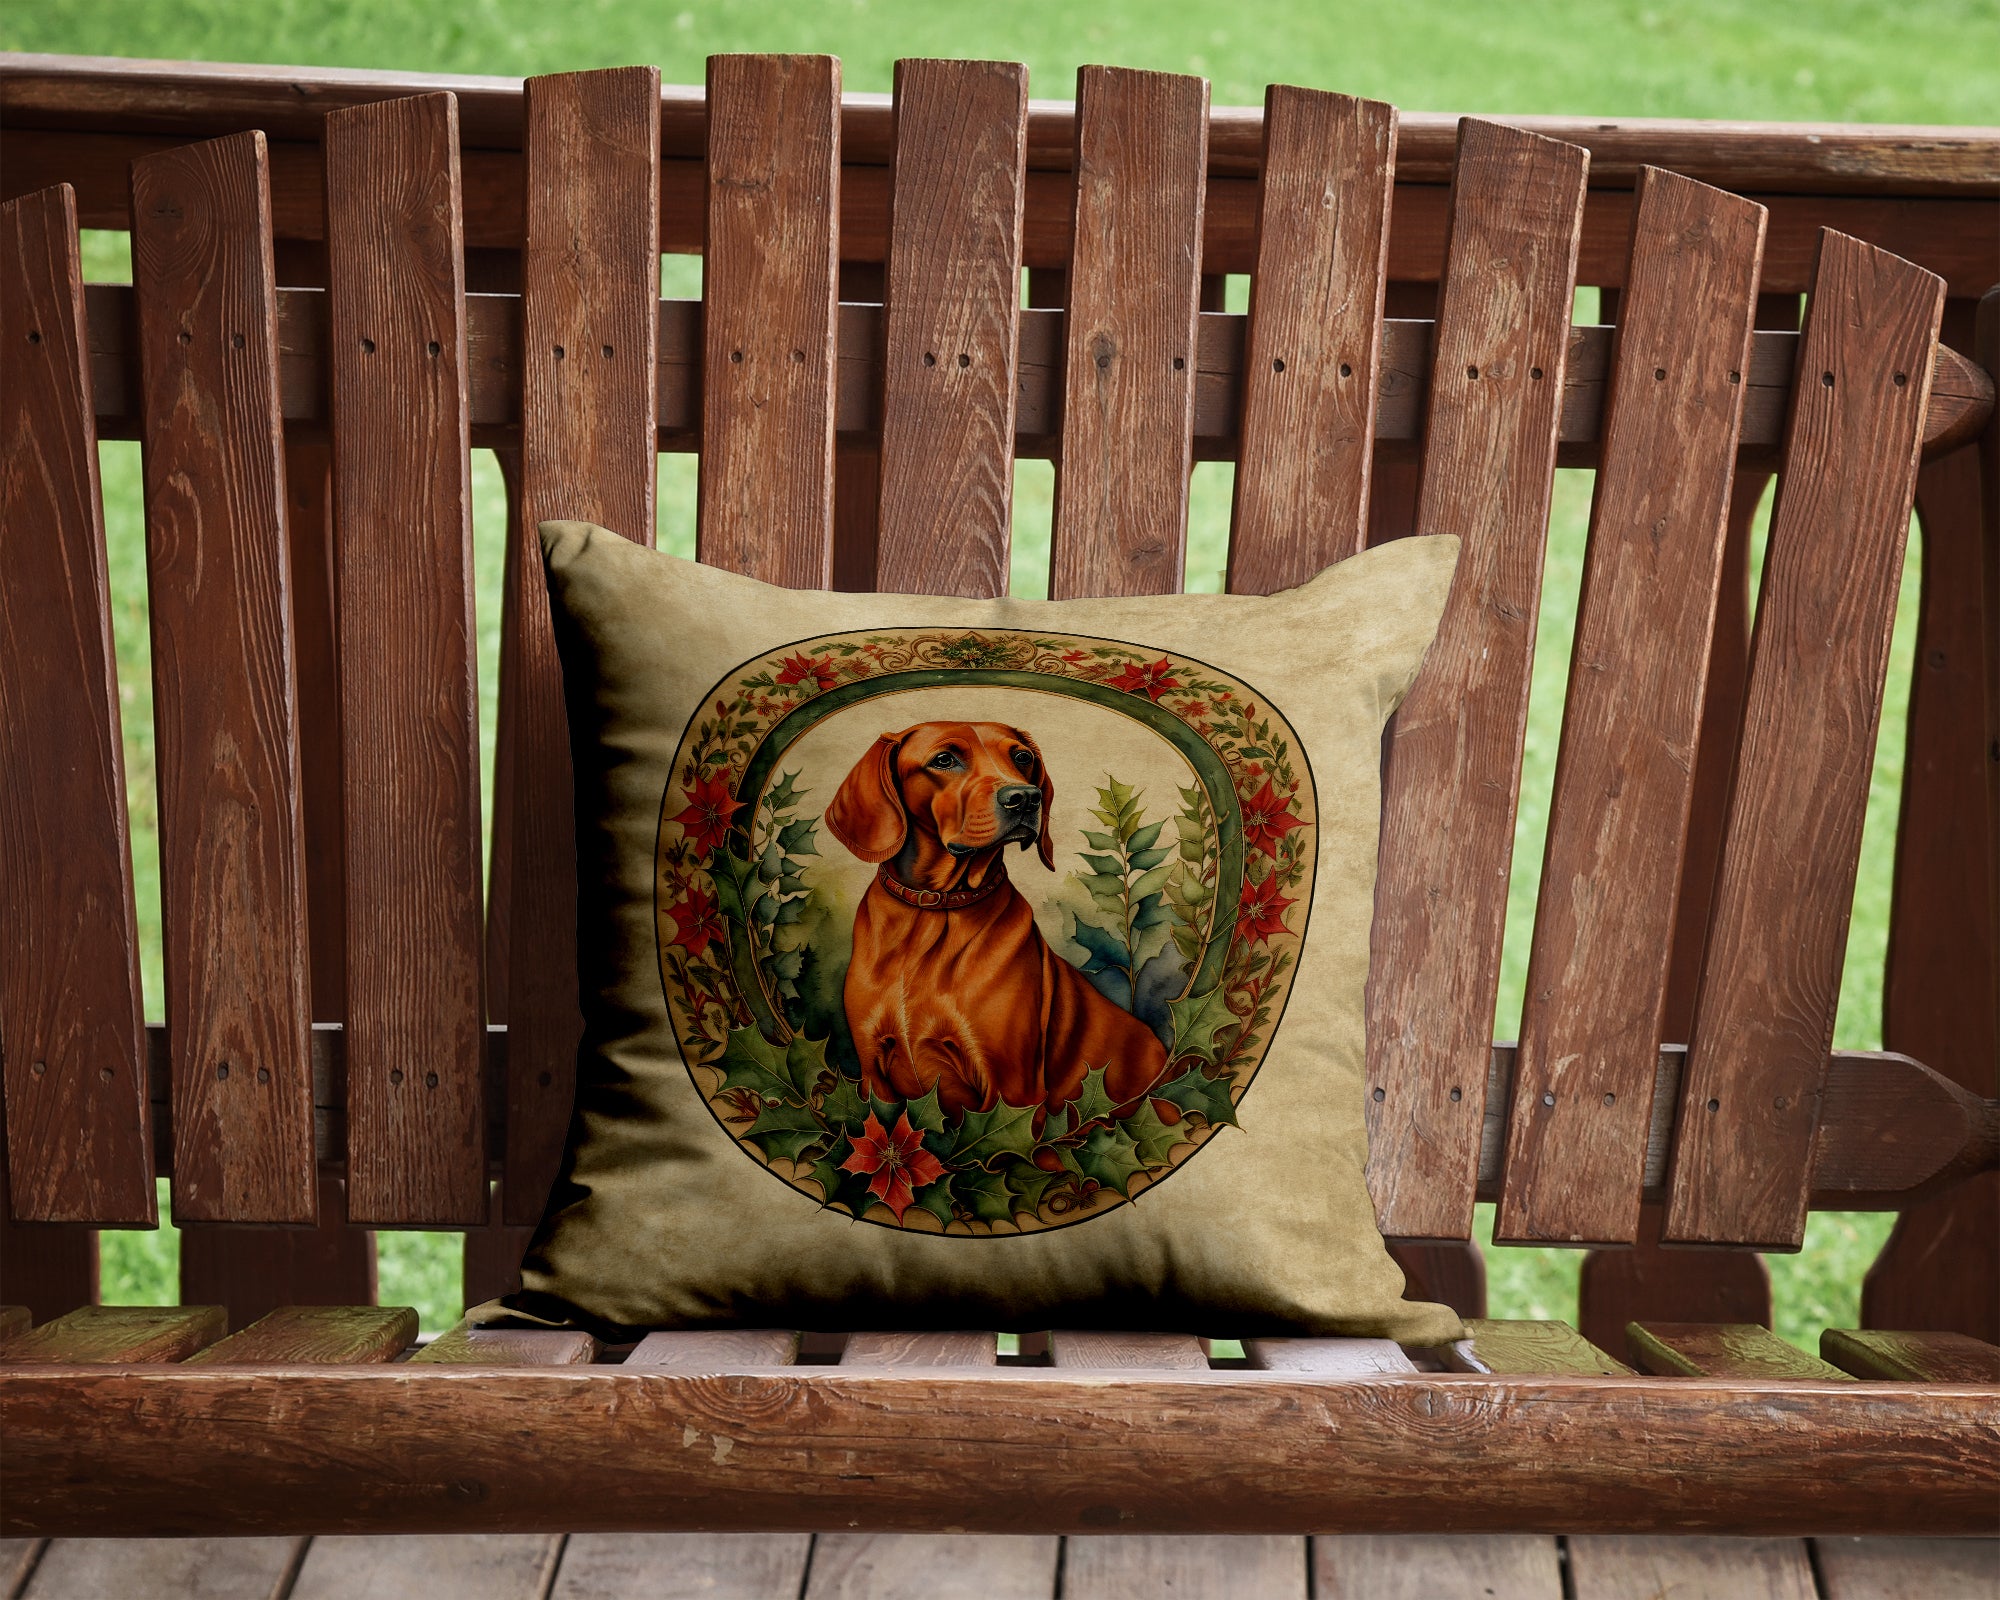 Buy this Red Redbone Coonhound Christmas Flowers Throw Pillow